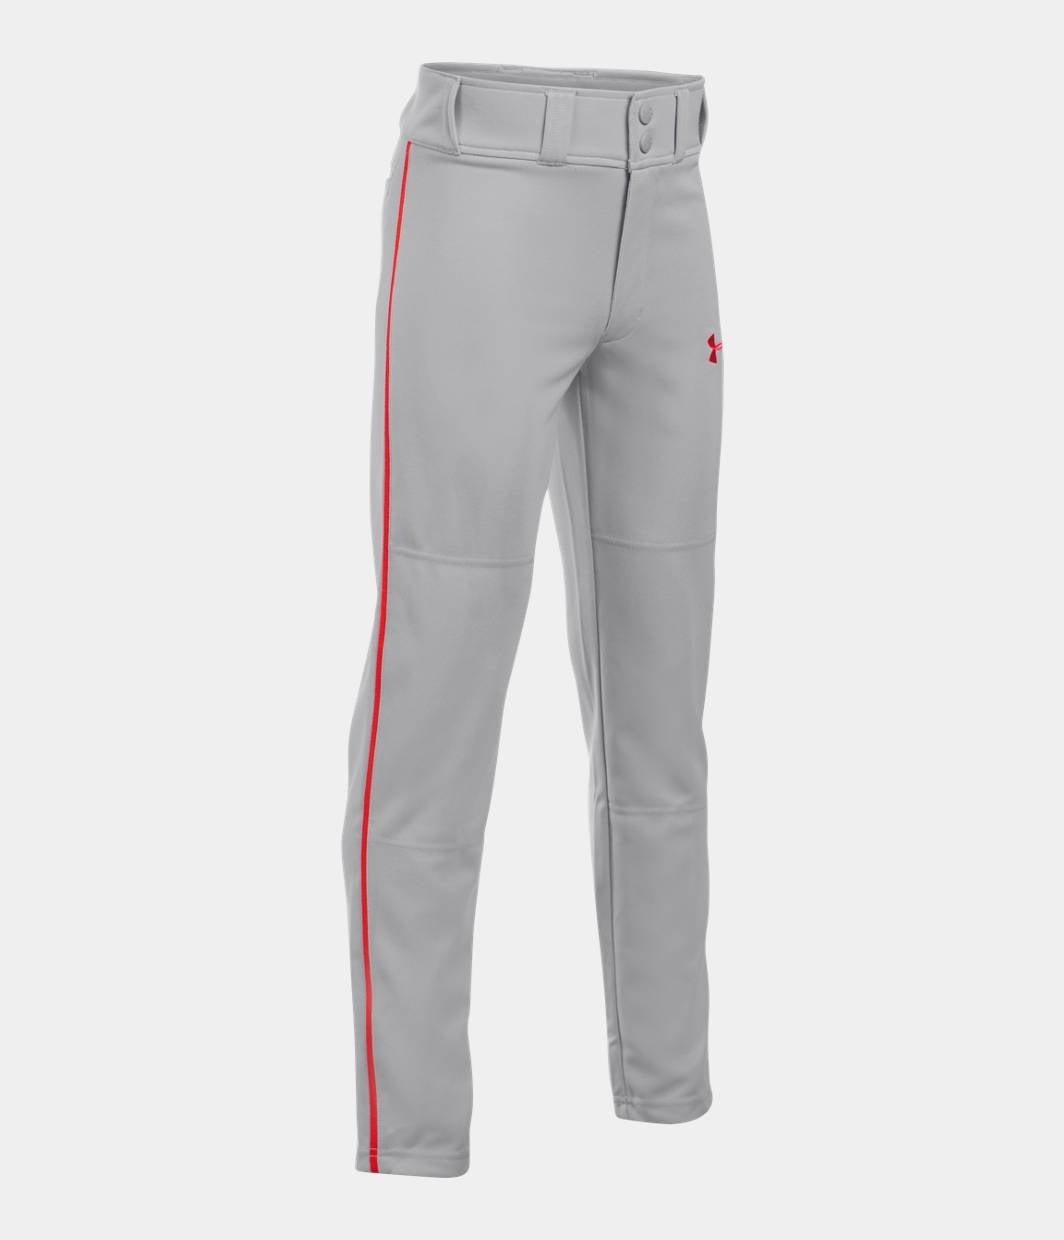 Under Armour Boys Clean Up Piped Pants White/Red Stripe Youth Medium 